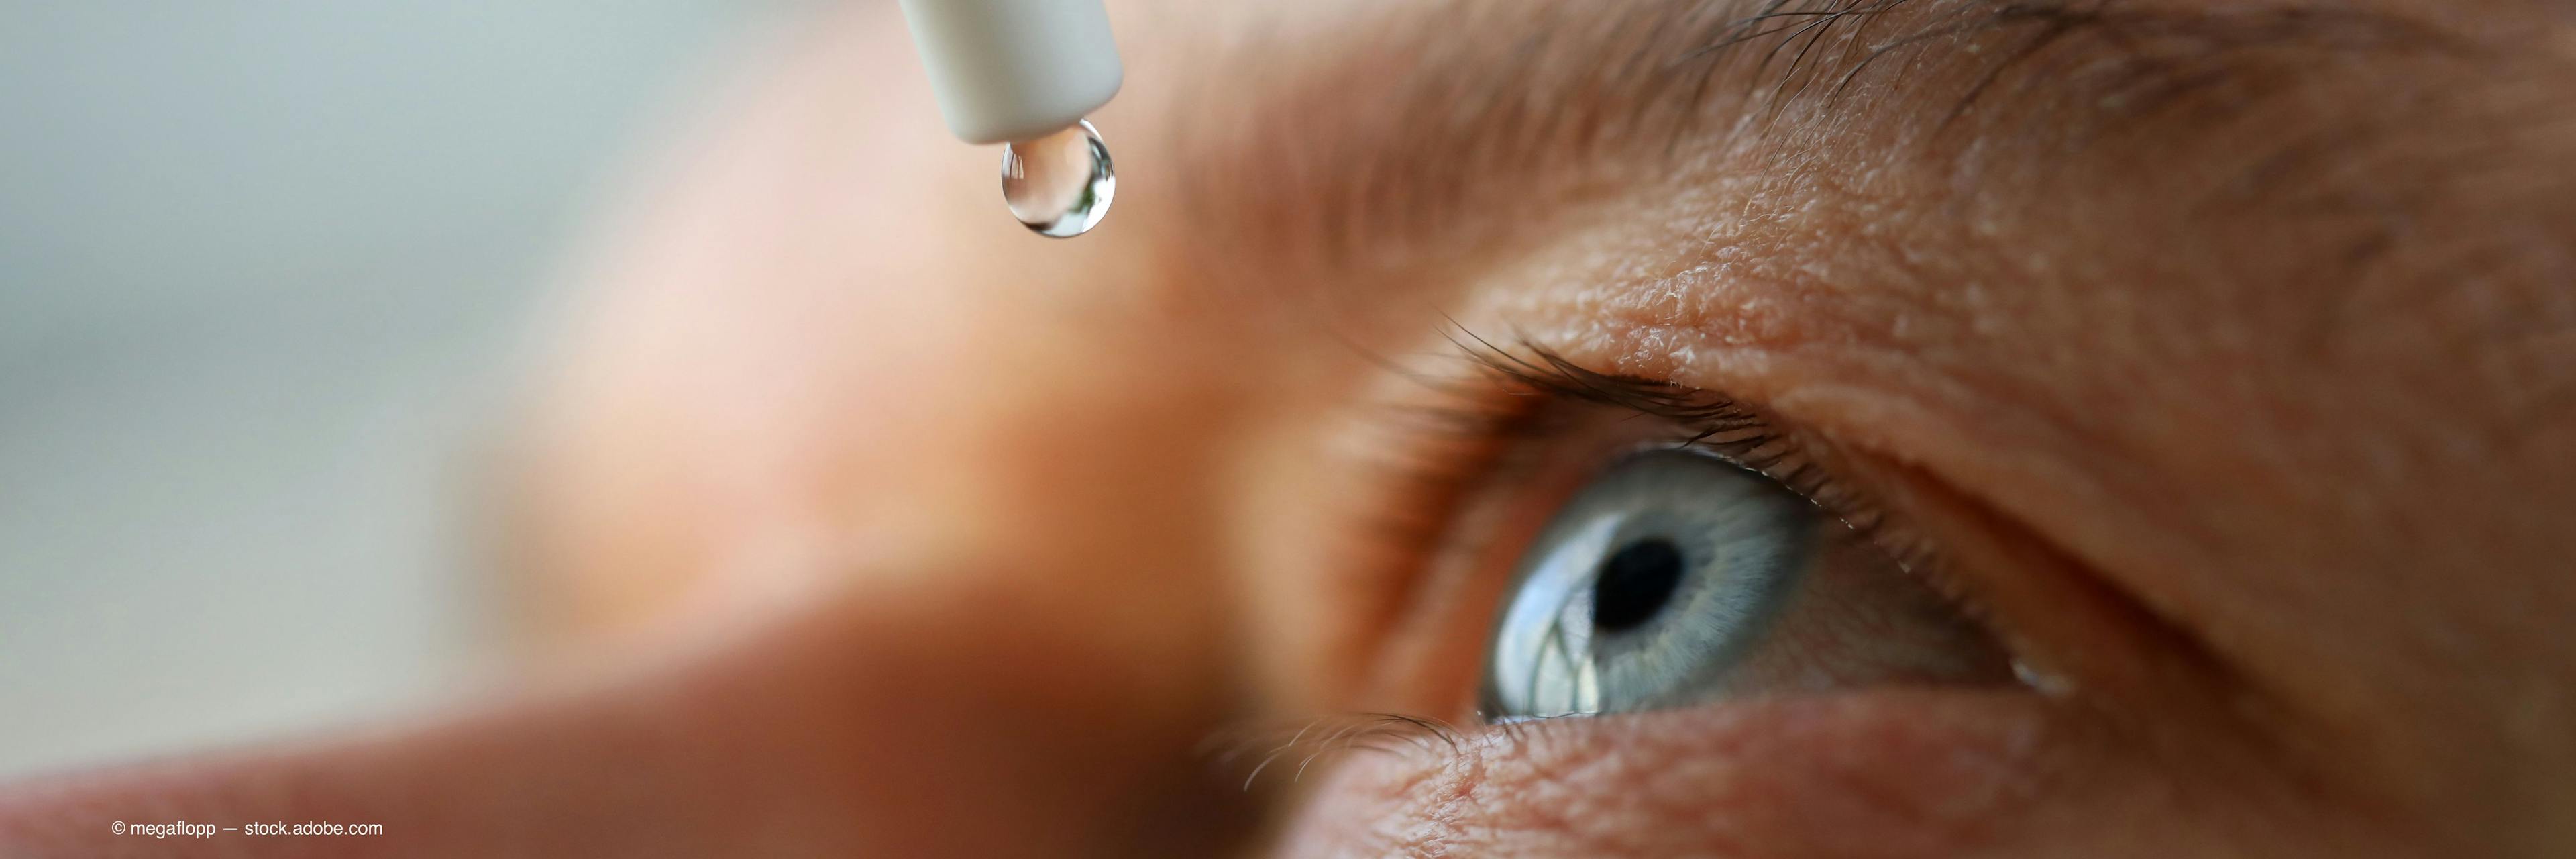 Combination drops may help patients challenged by multiple glaucoma meds